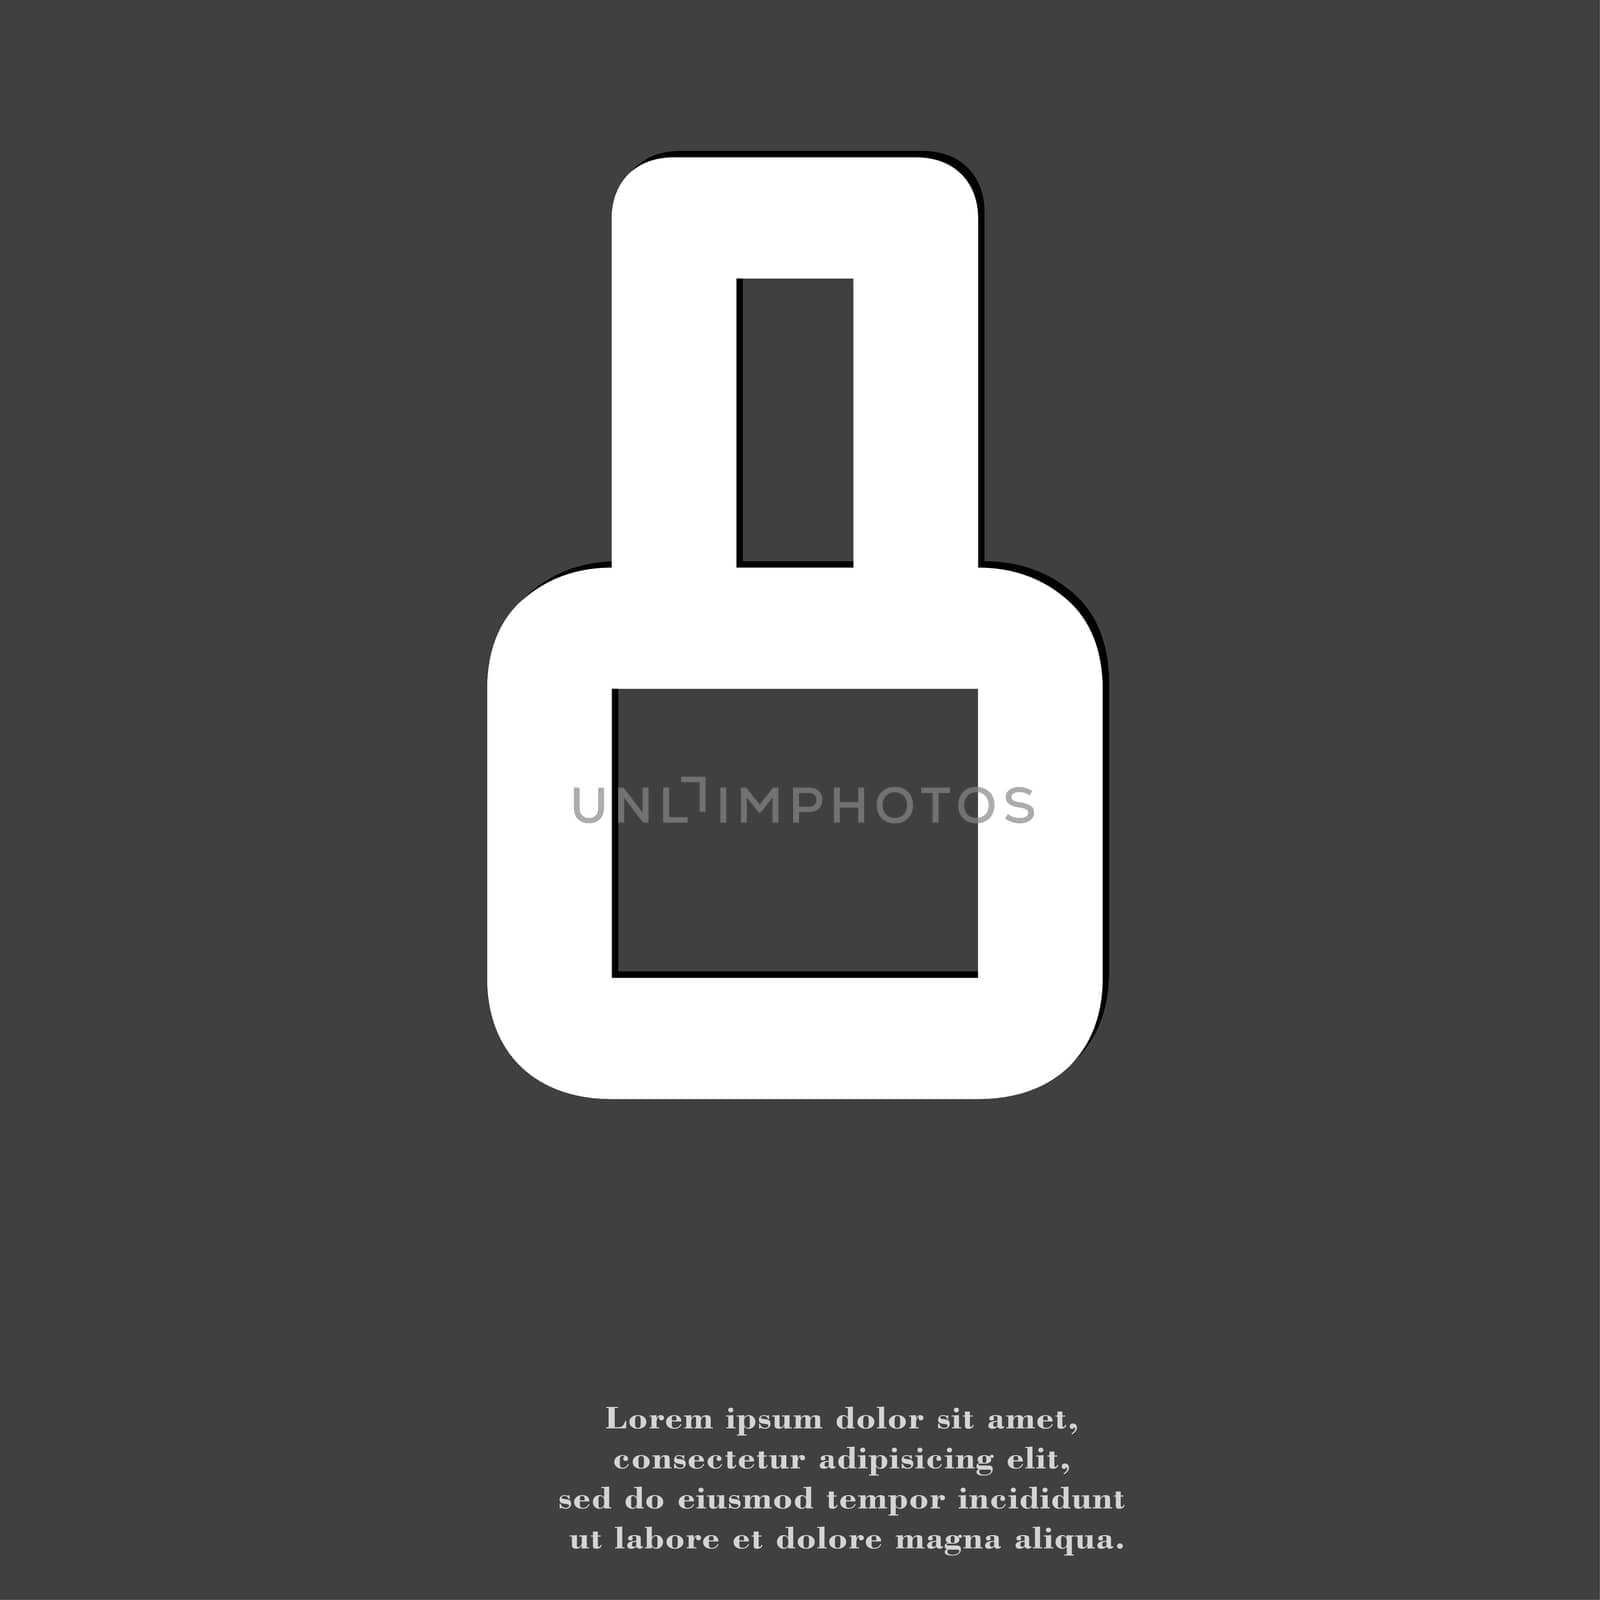 number Eight icon symbol Flat modern web design with long shadow and space for your text. illustration